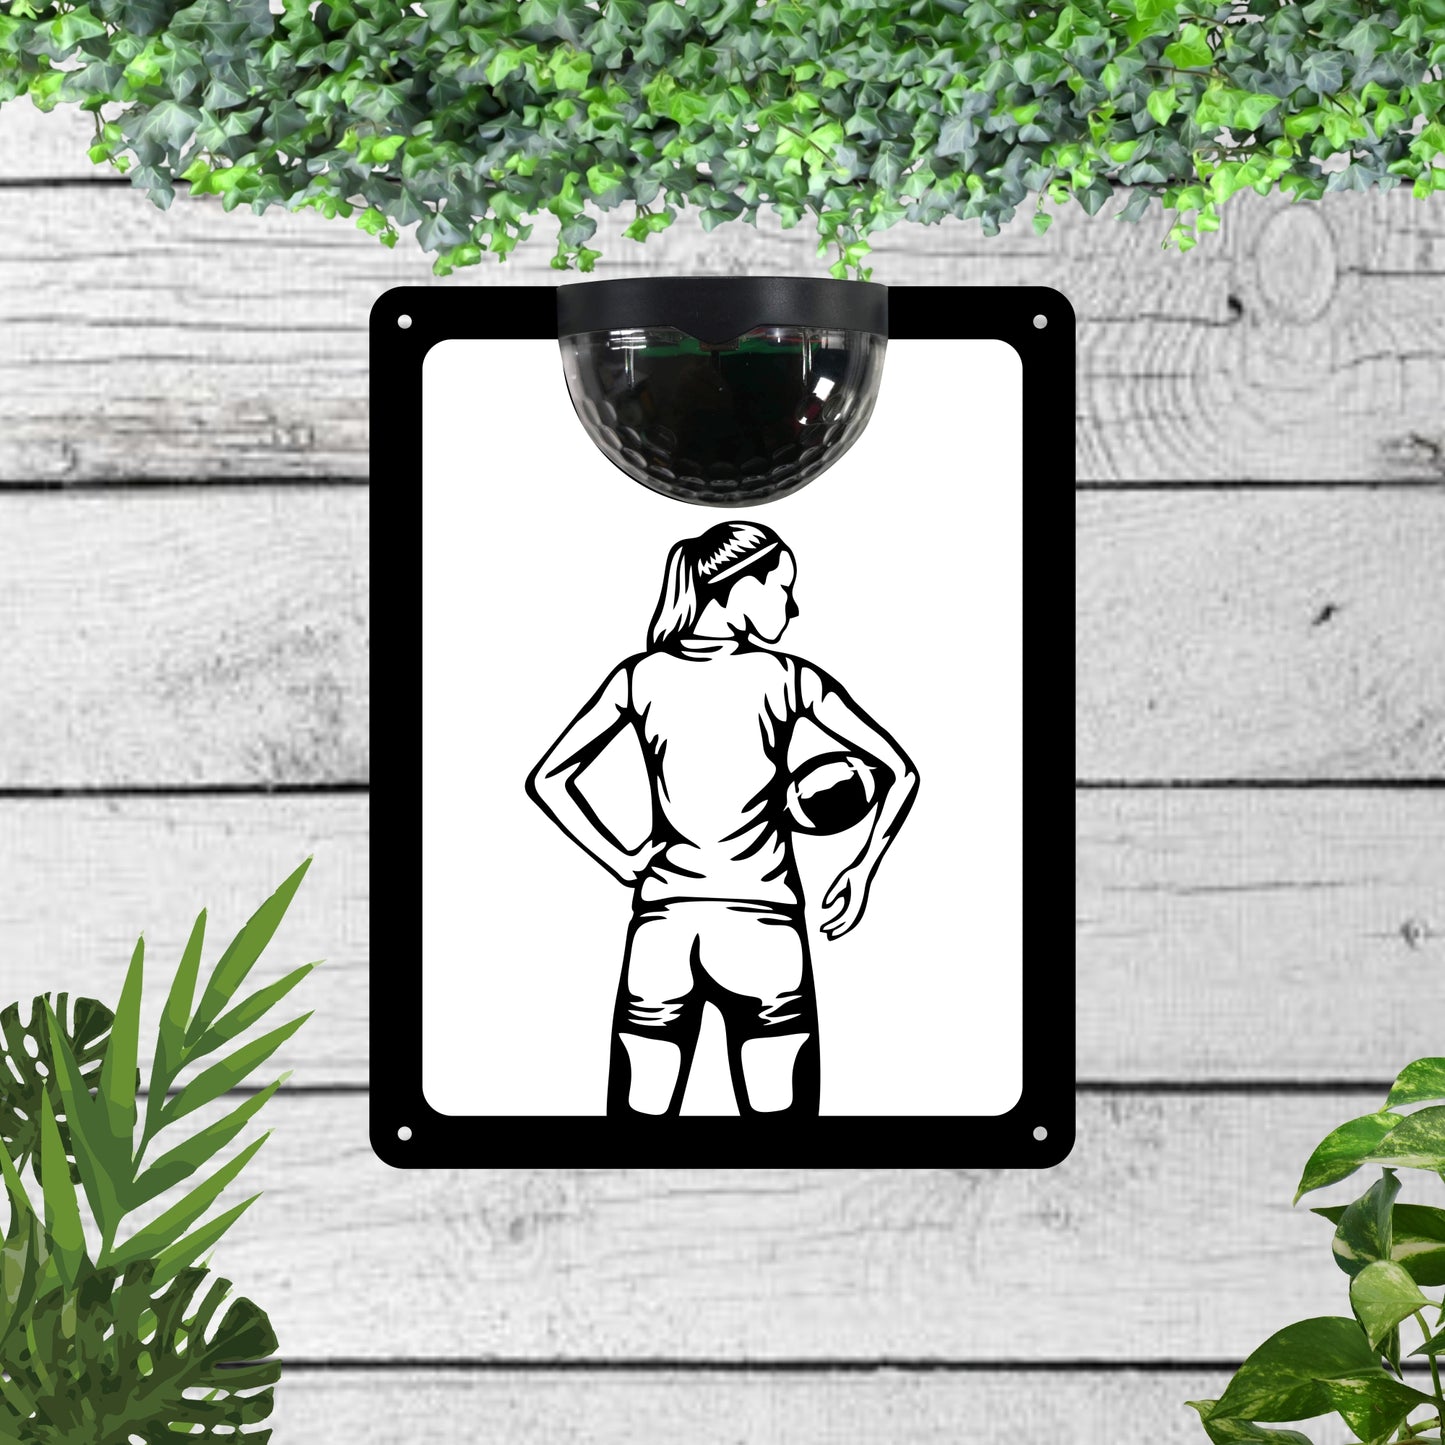 Garden solar wall plaque featuring a Female rugby player | John Alans